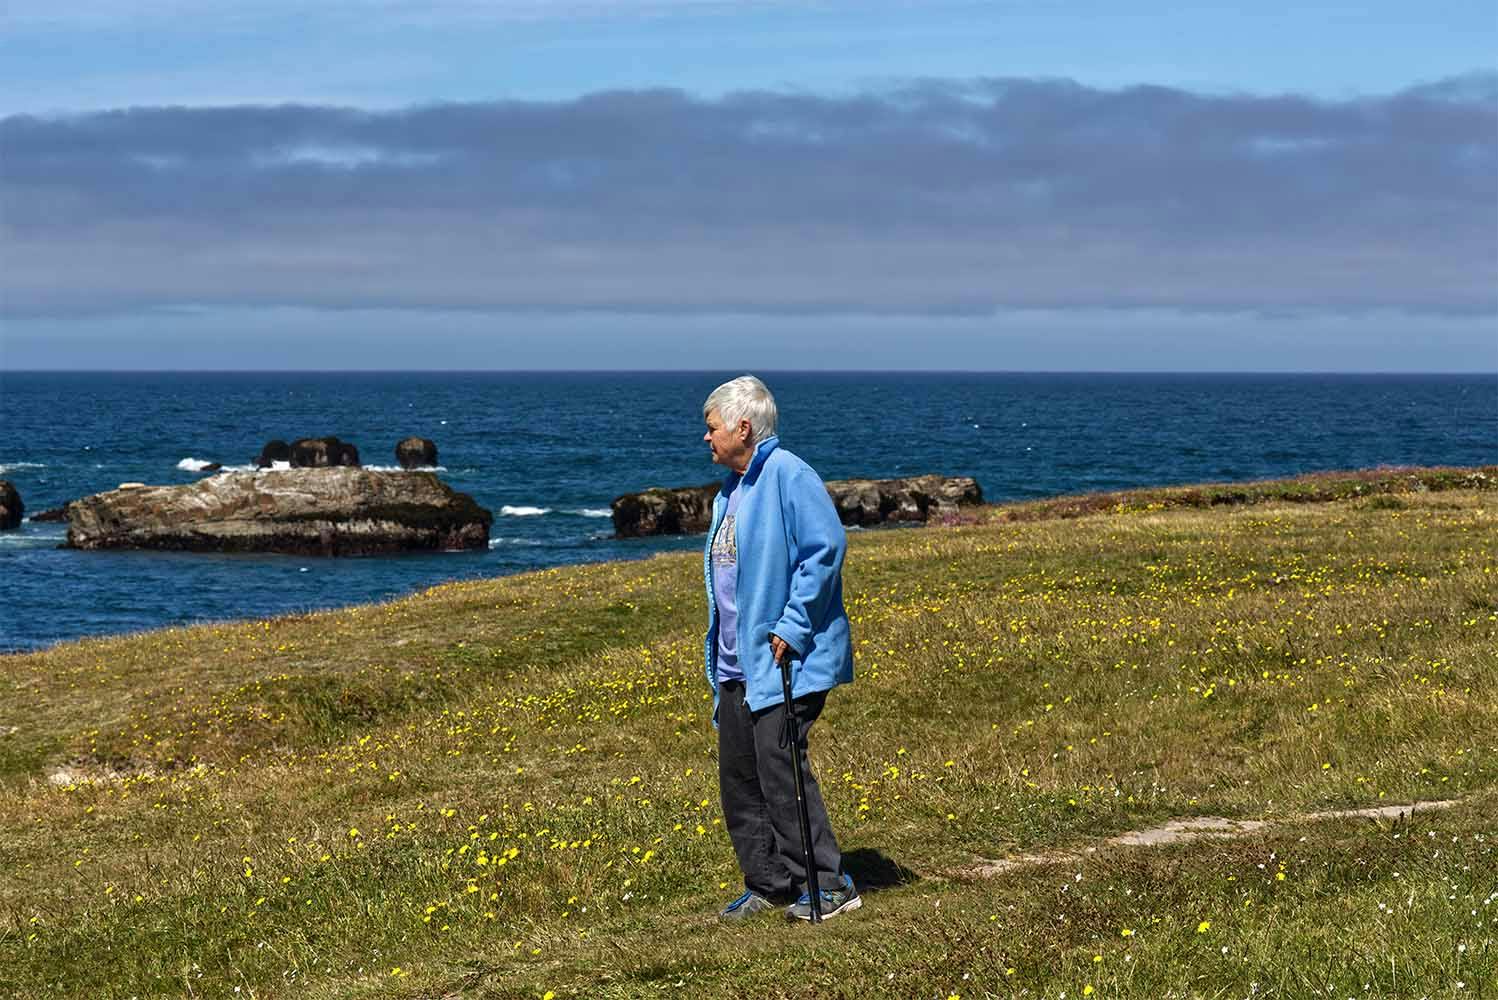 A resident overlooking a coastline